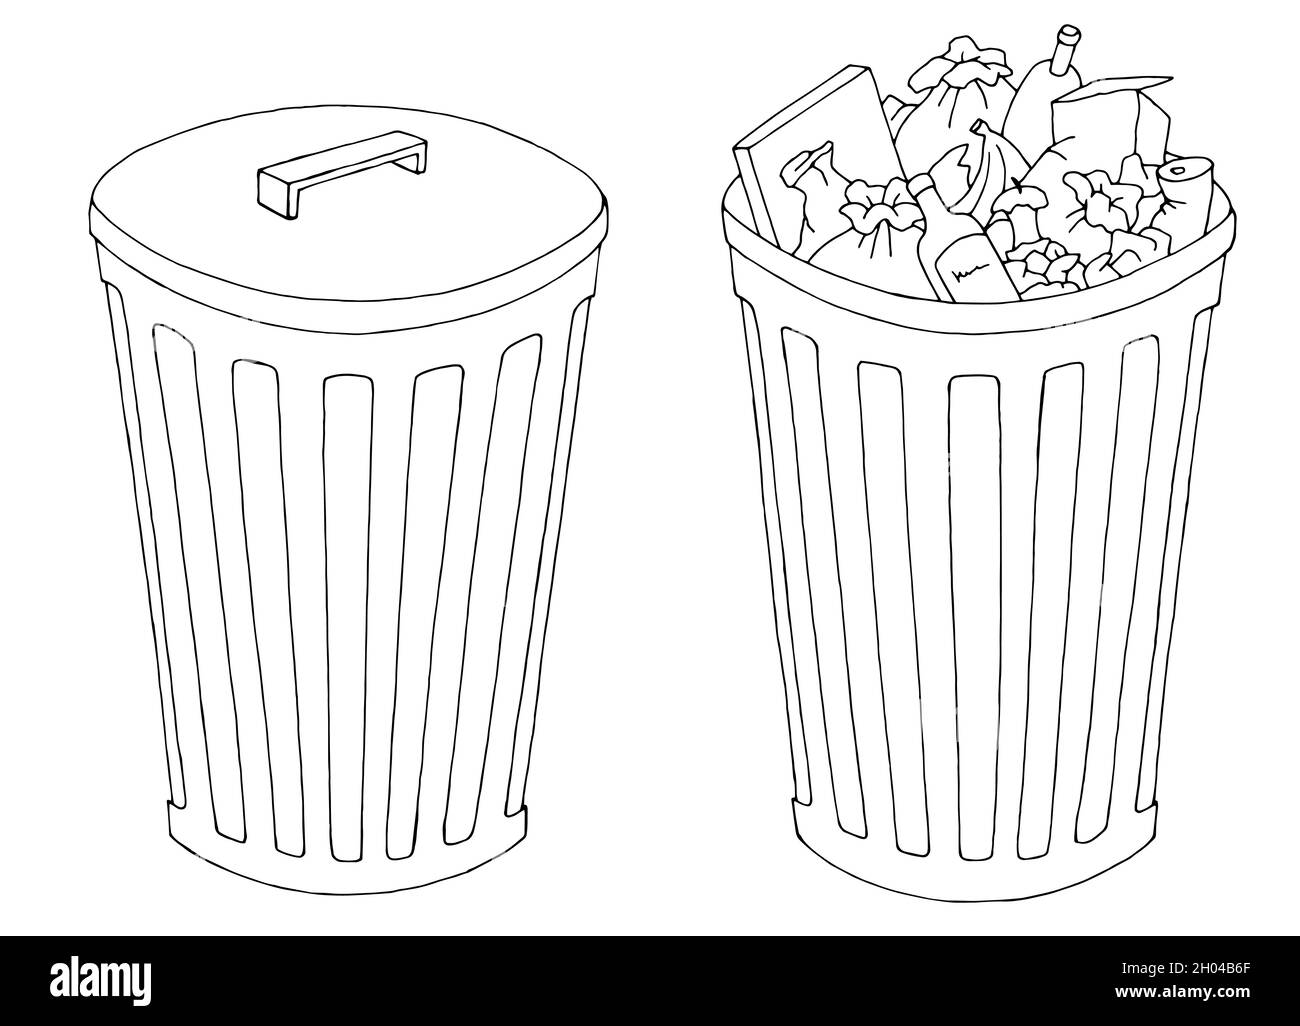 Recycling Bin Cartoon New Cute Garbage Basket Coloring Pages Free Download  Outline Sketch Drawing Vector PNG Image Free Download And Clipart Image For  Free Download - Lovepik | 380532441